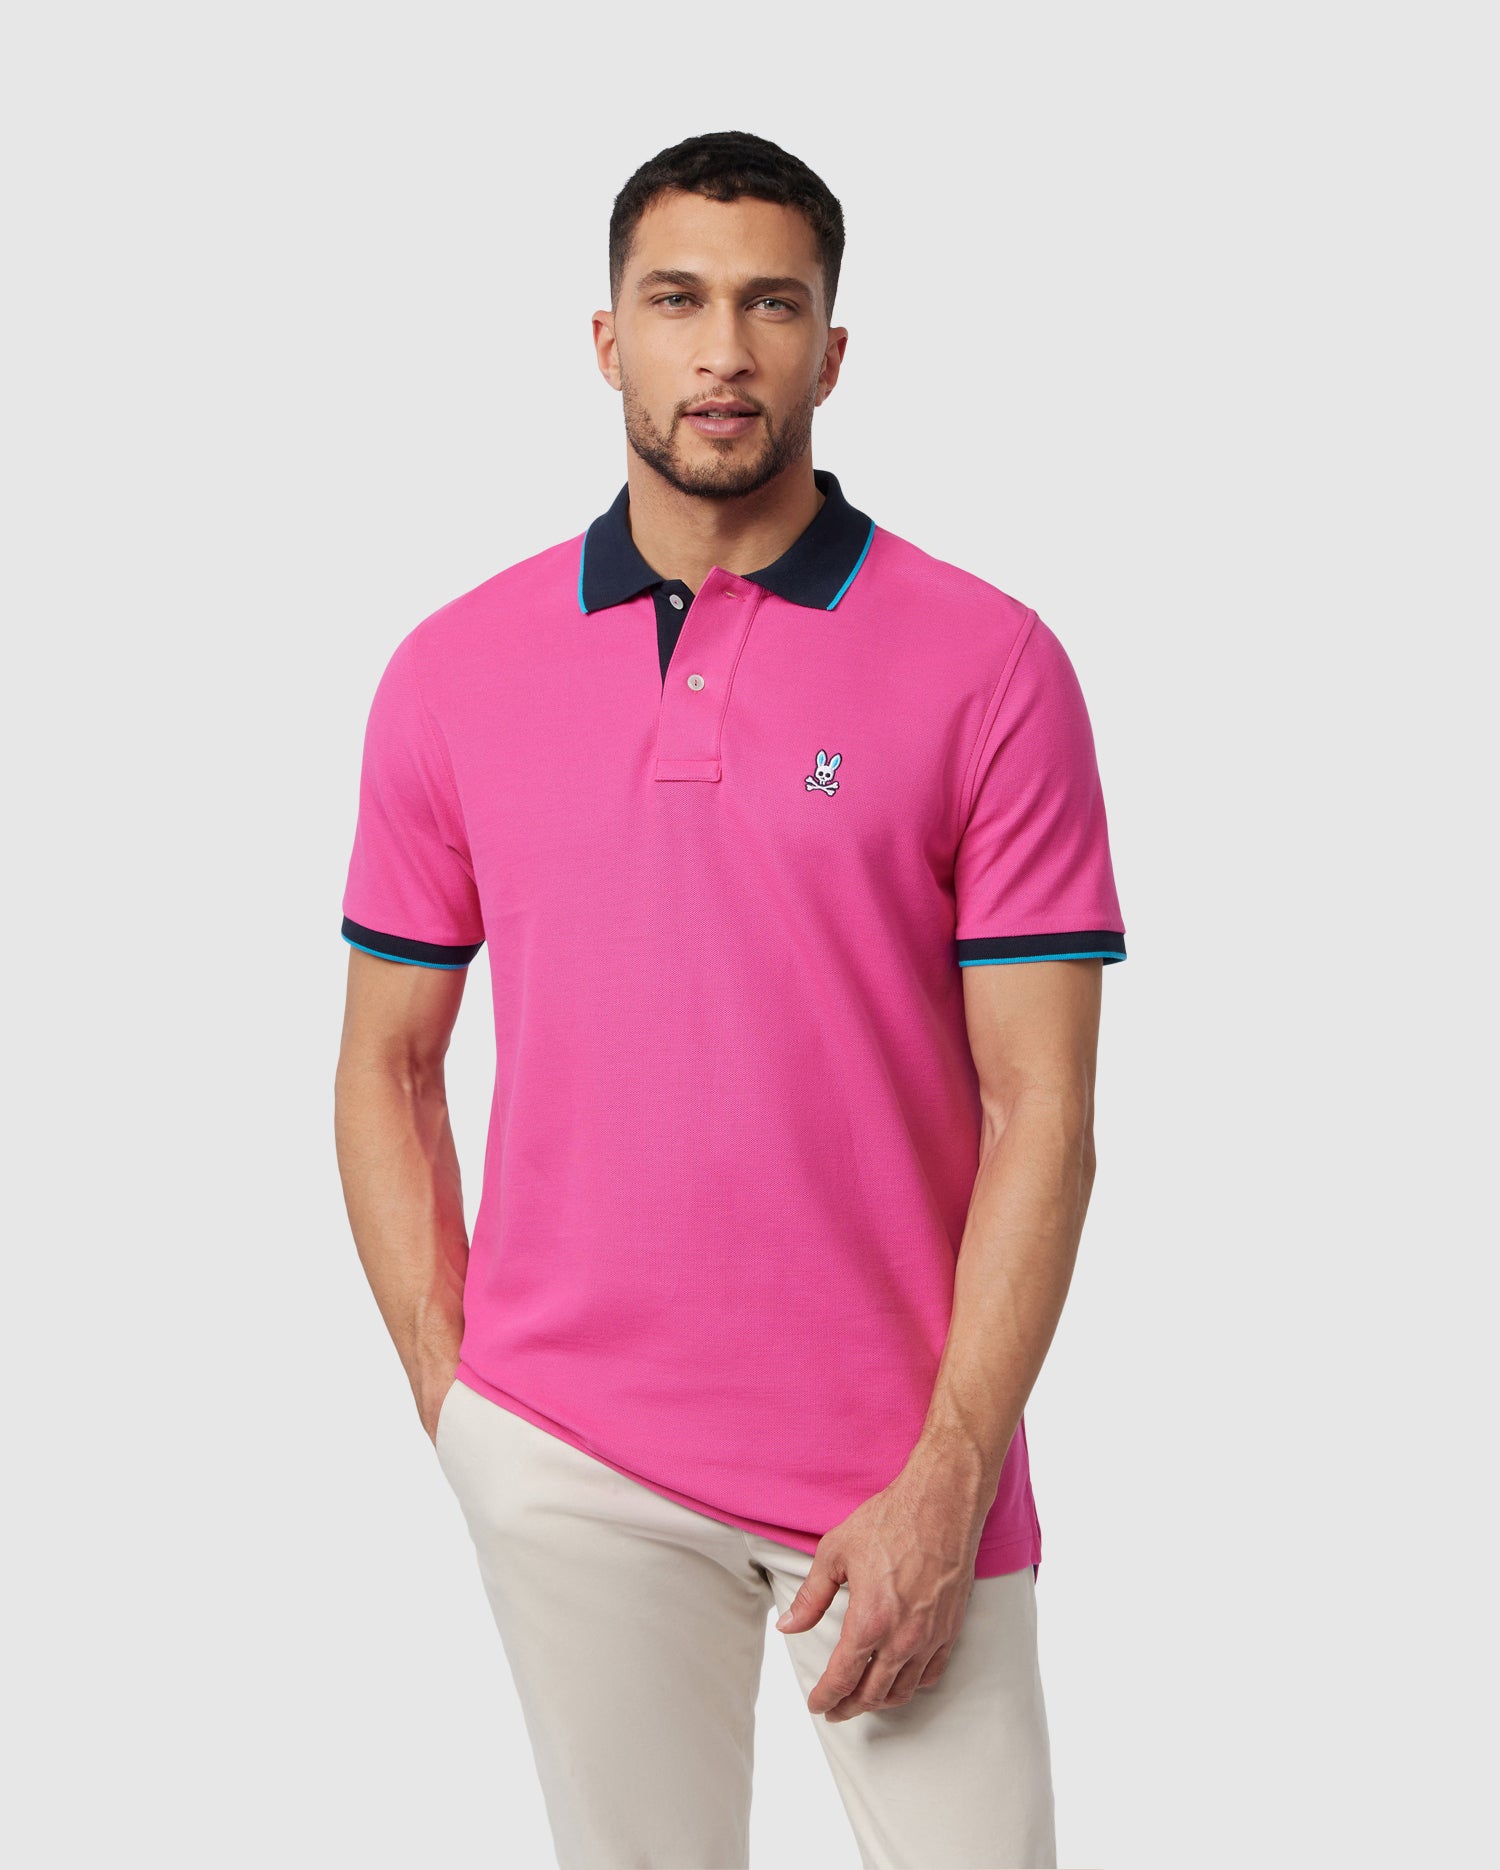 A man wearing a vibrant pink Psycho Bunny MENS TROY PIQUE POLO with blue accents on the collar and sleeves, posing against a plain background. He has short dark hair and a light stubble.